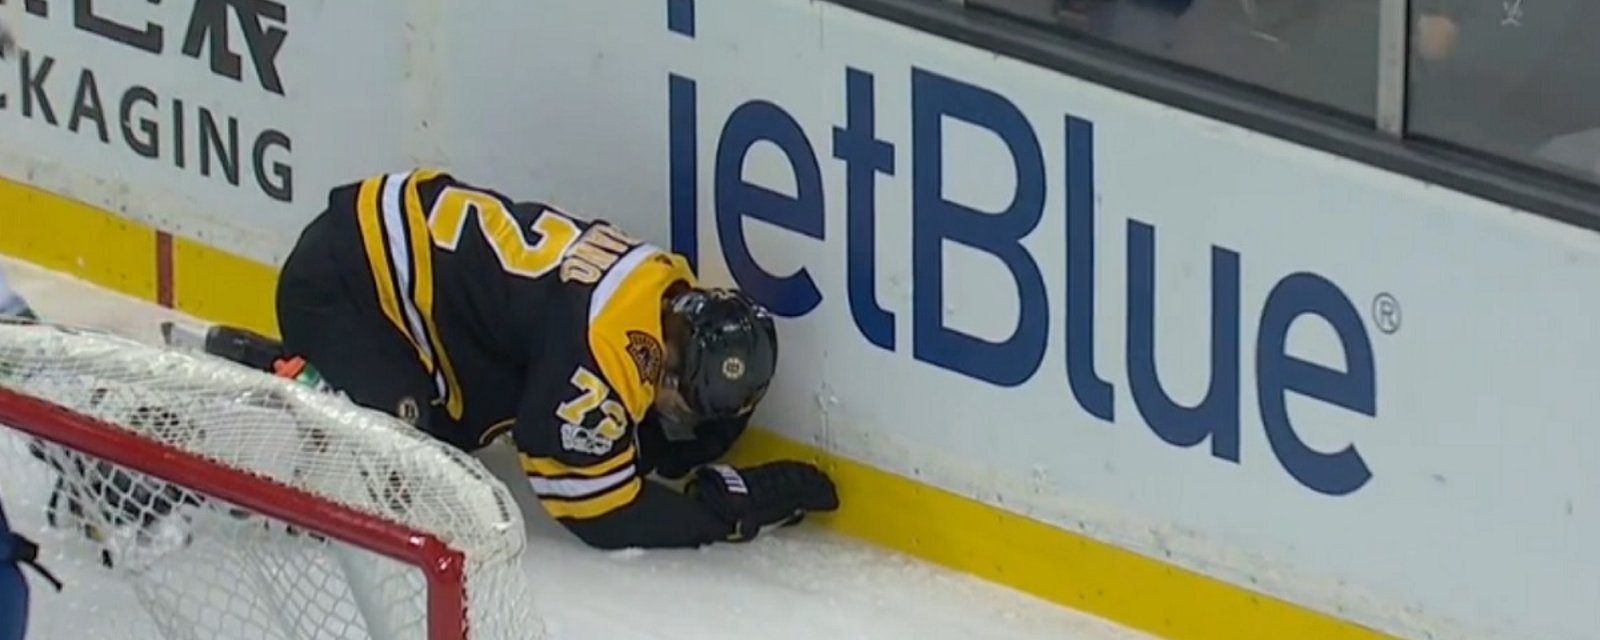 Breaking: Another Bruin goes down after a big hit from behind. 